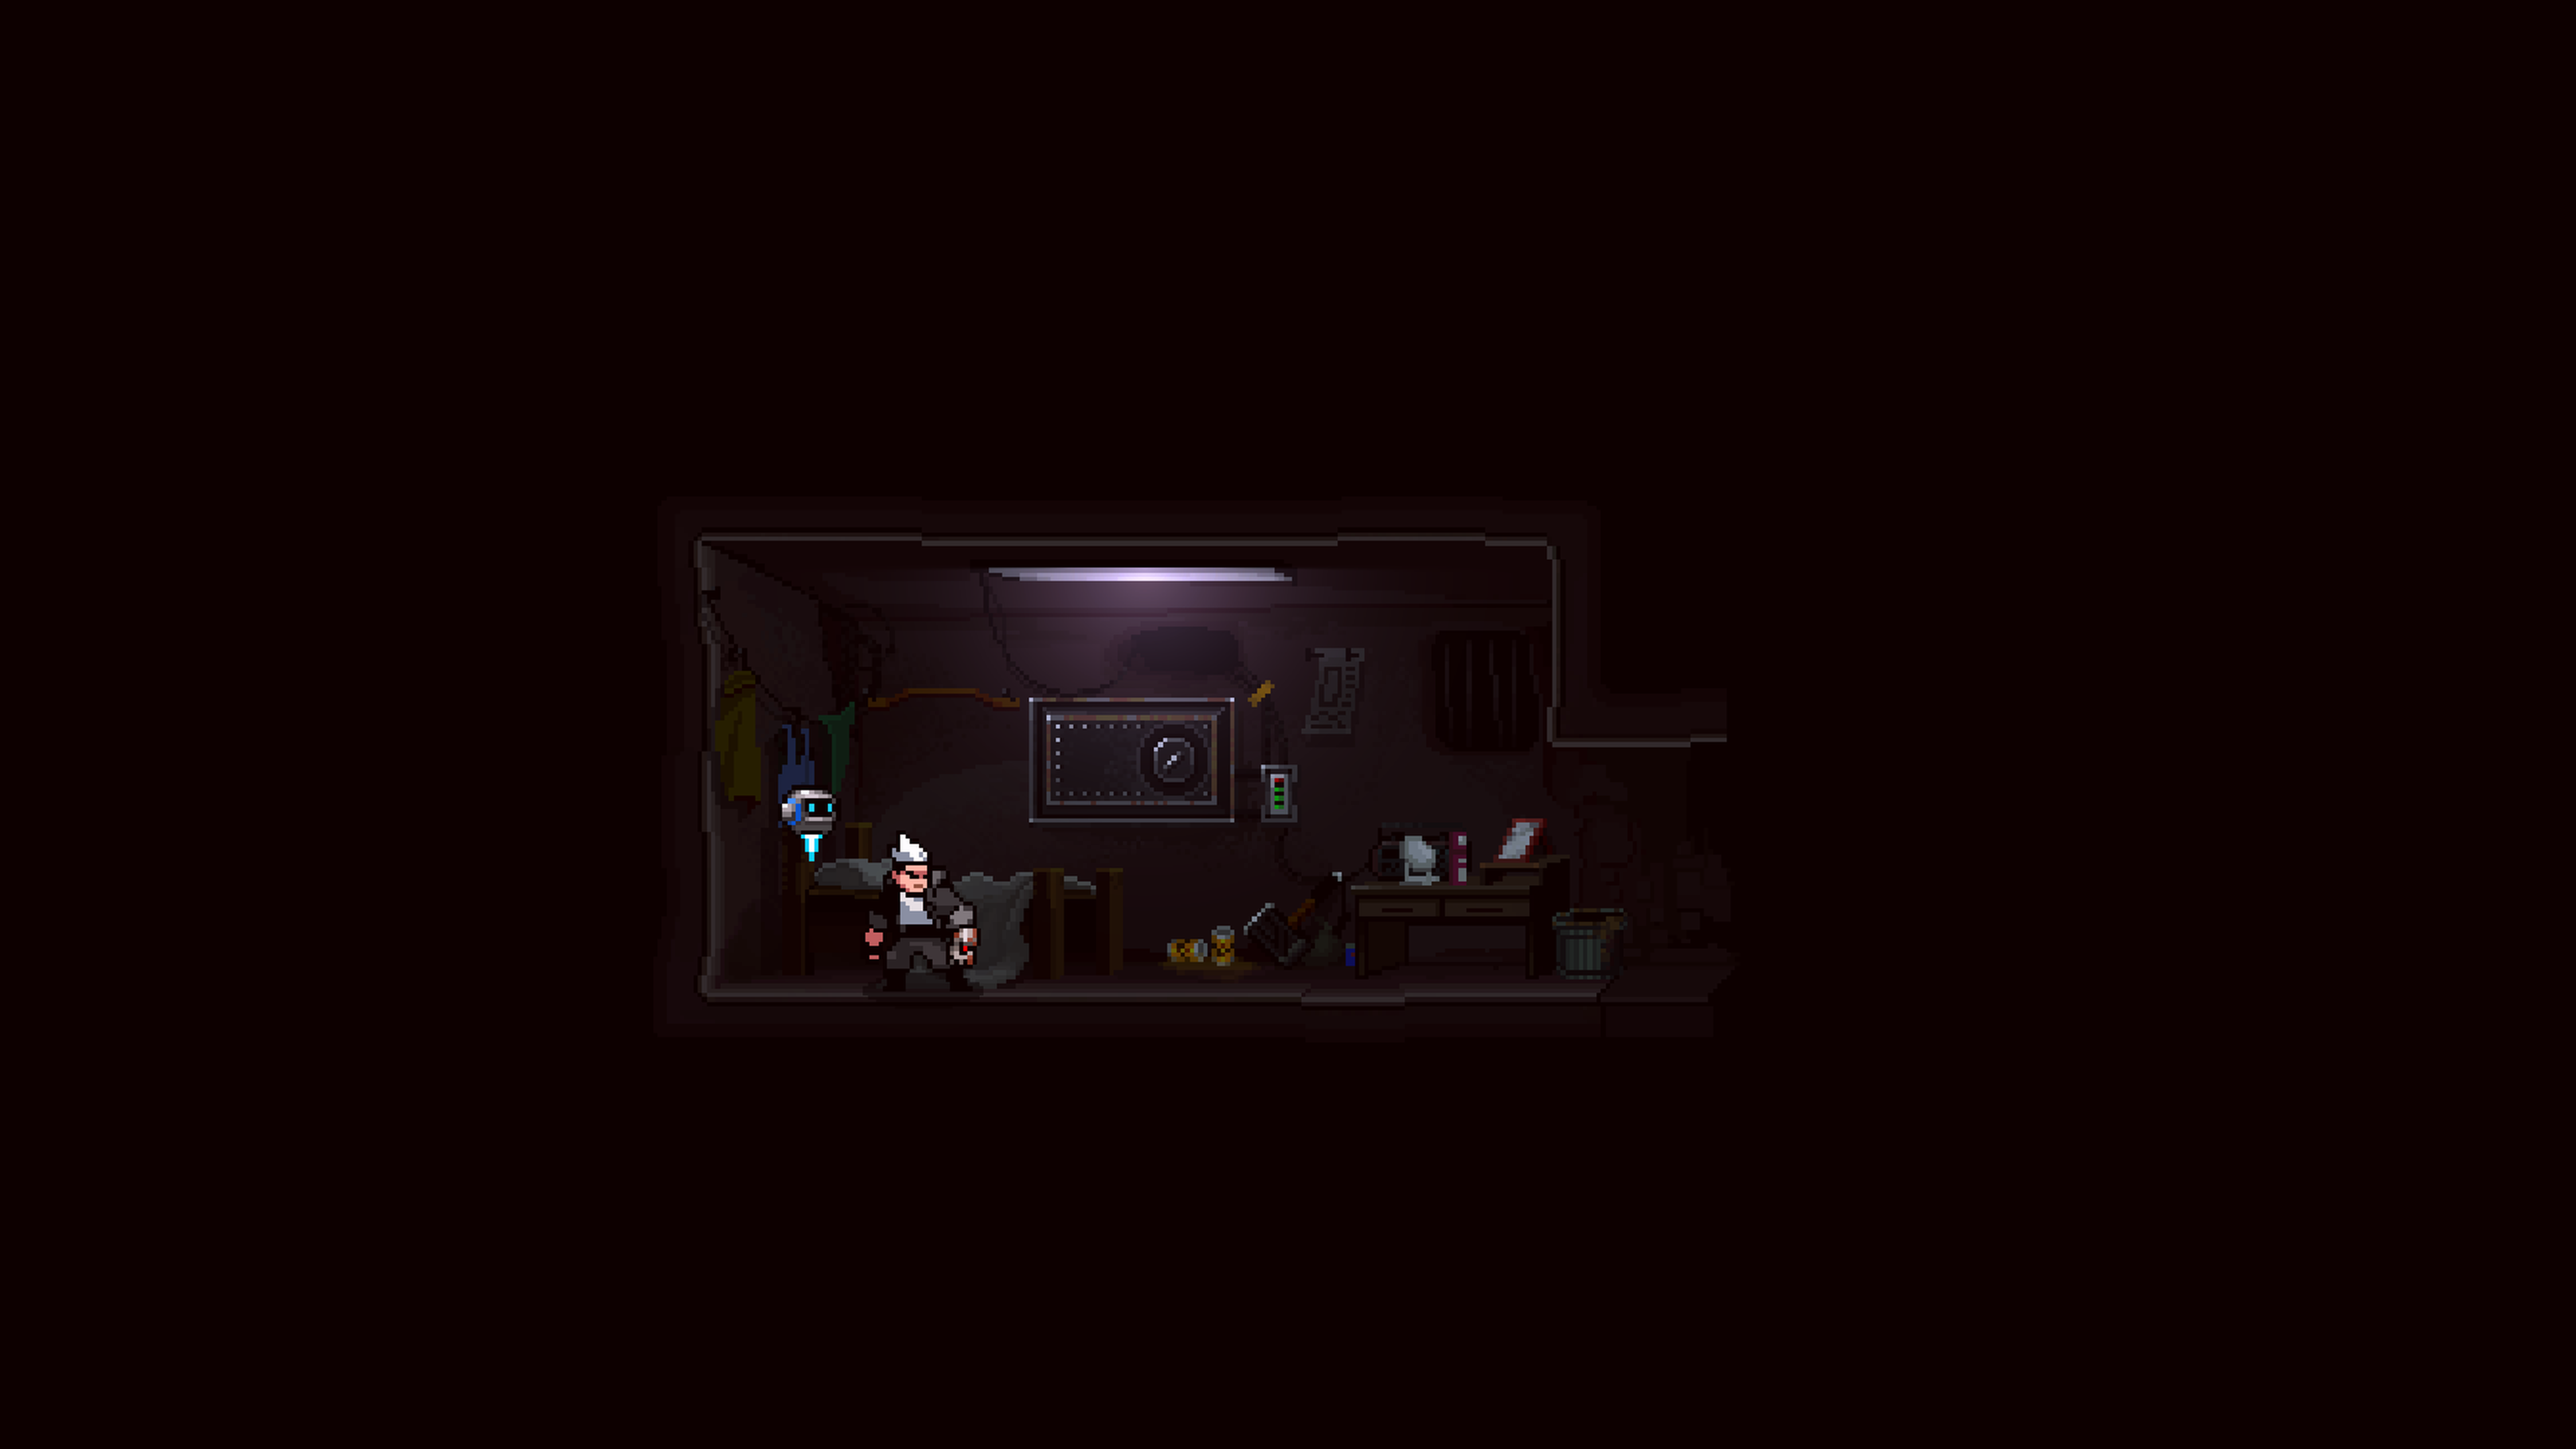 A 2D pixel art character with spiked white hair and wearing a black leather jacket is standing in a small dark bedroom lit by a single dull ceiling light